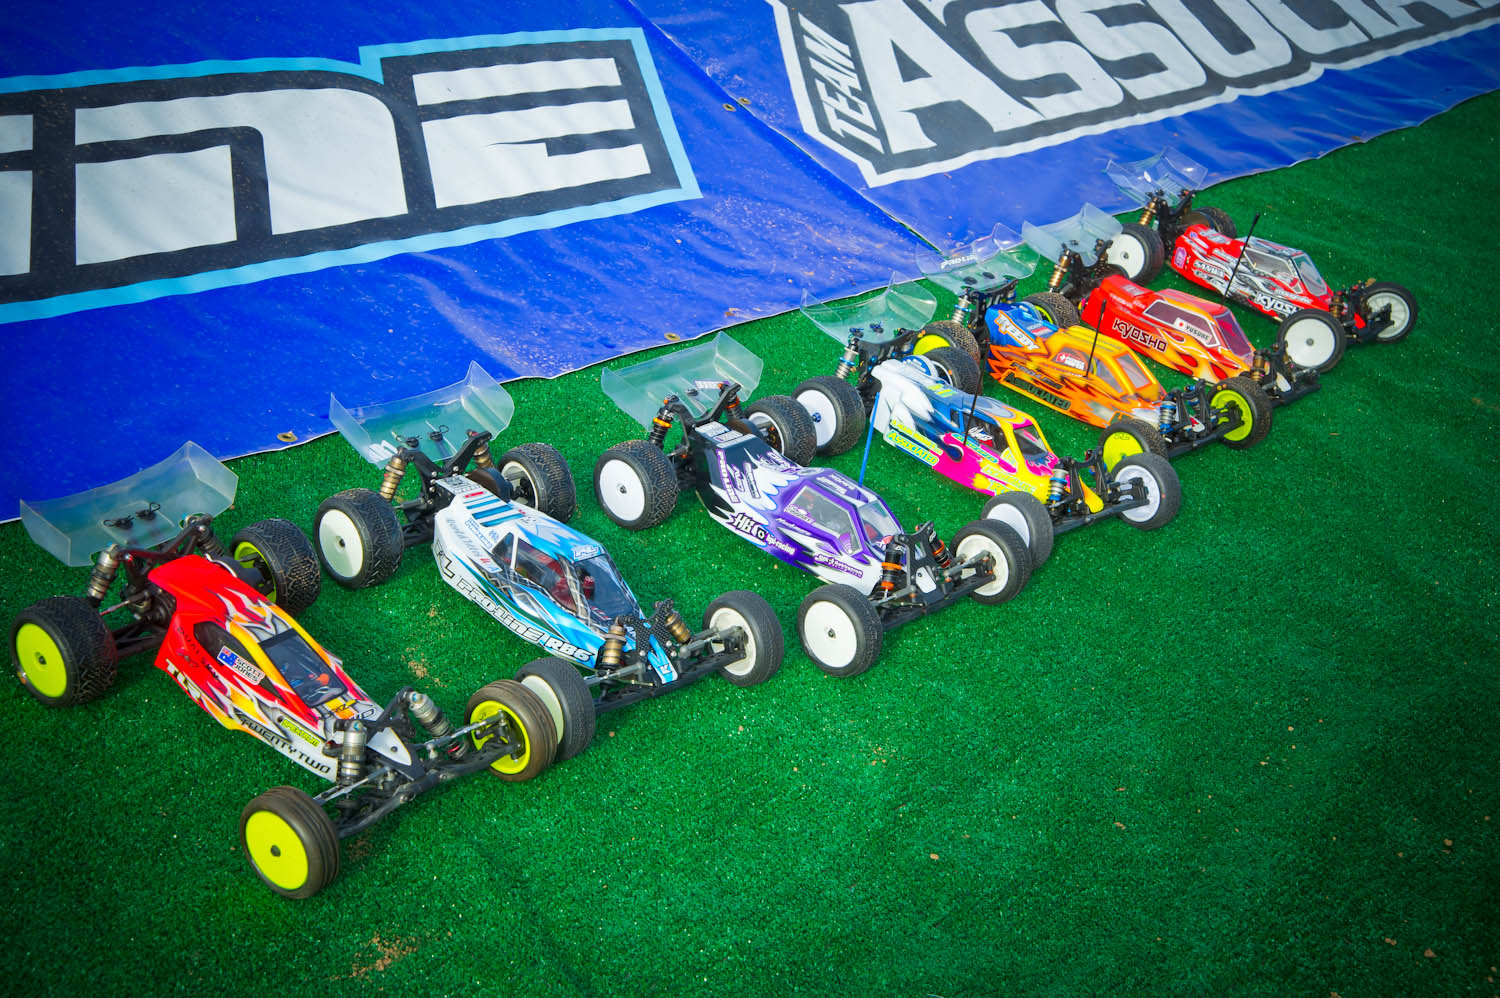 RC Car Action - RC Cars & Trucks | 2013 IFMAR Worlds Sunday0100193